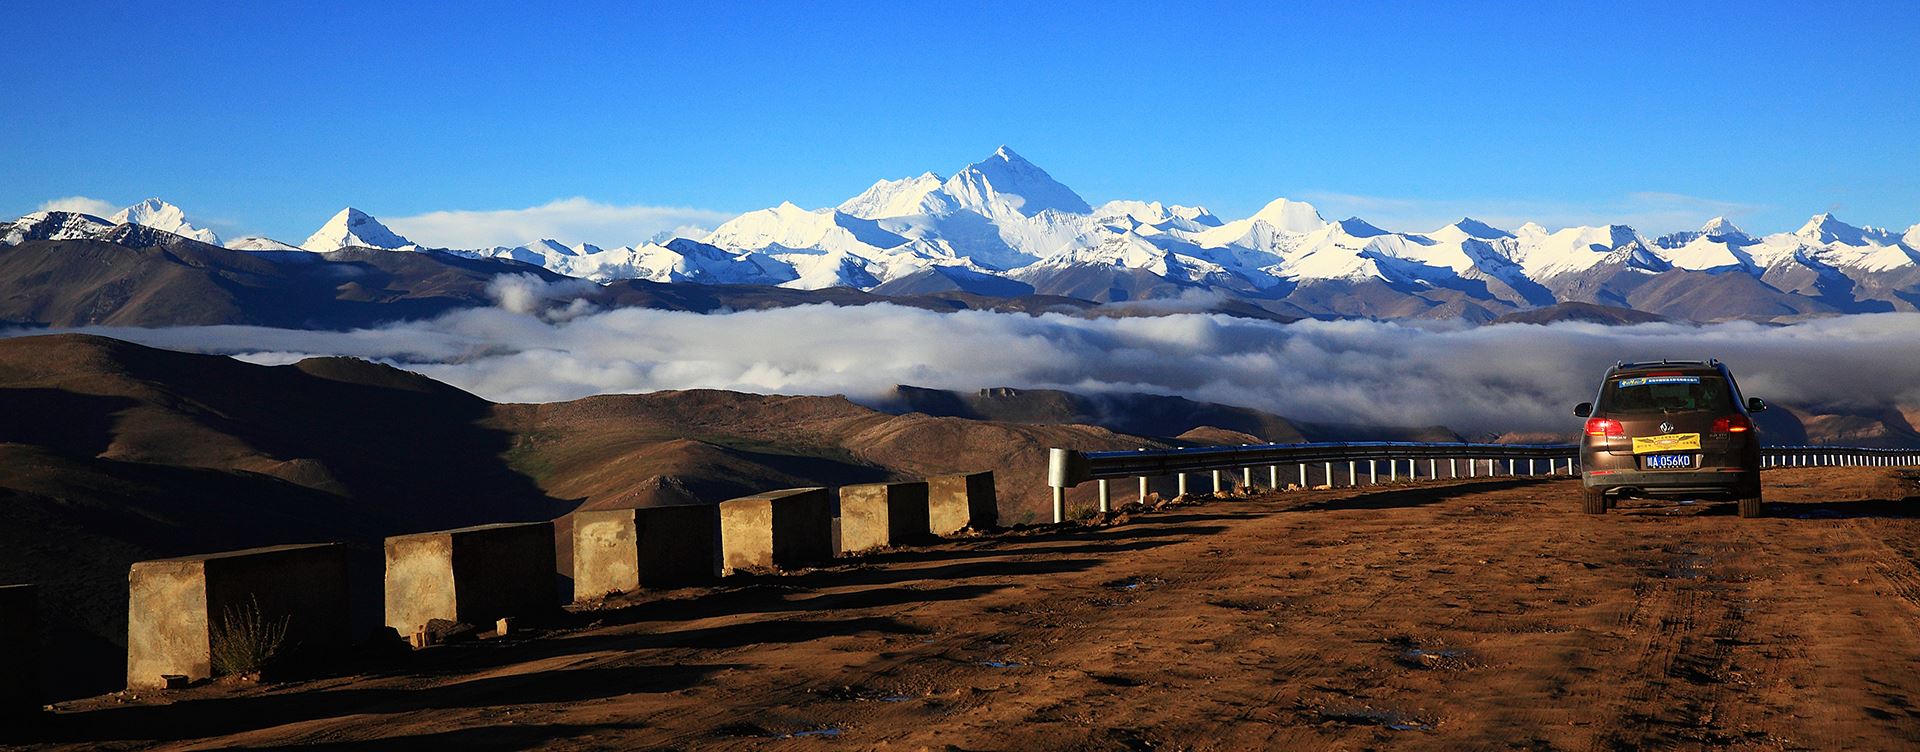 Overland Tour from Tibet to Xinjiang with Everest and Trekking around Kailash